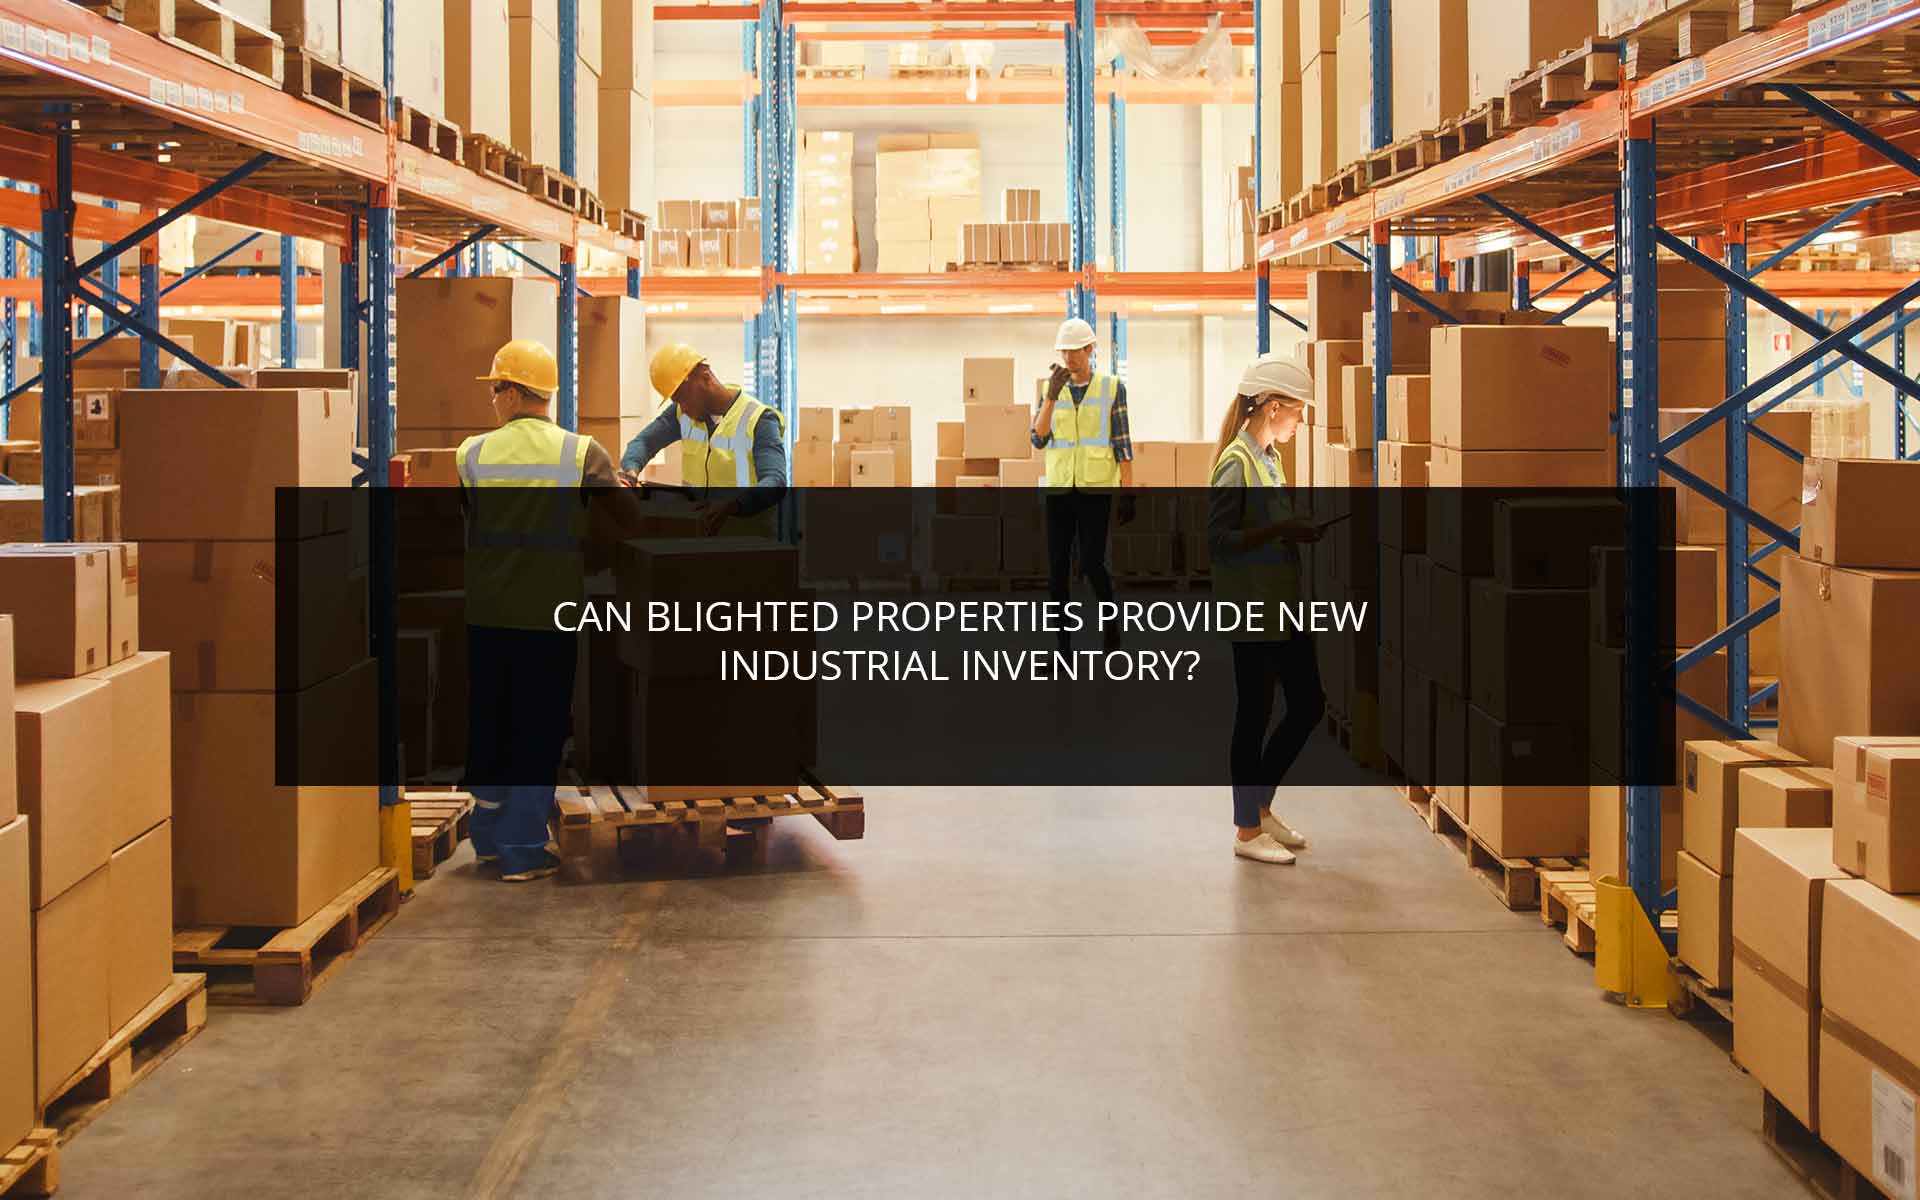 Can Blighted Properties Provide New Industrial Inventory? | Phoenix 3PL